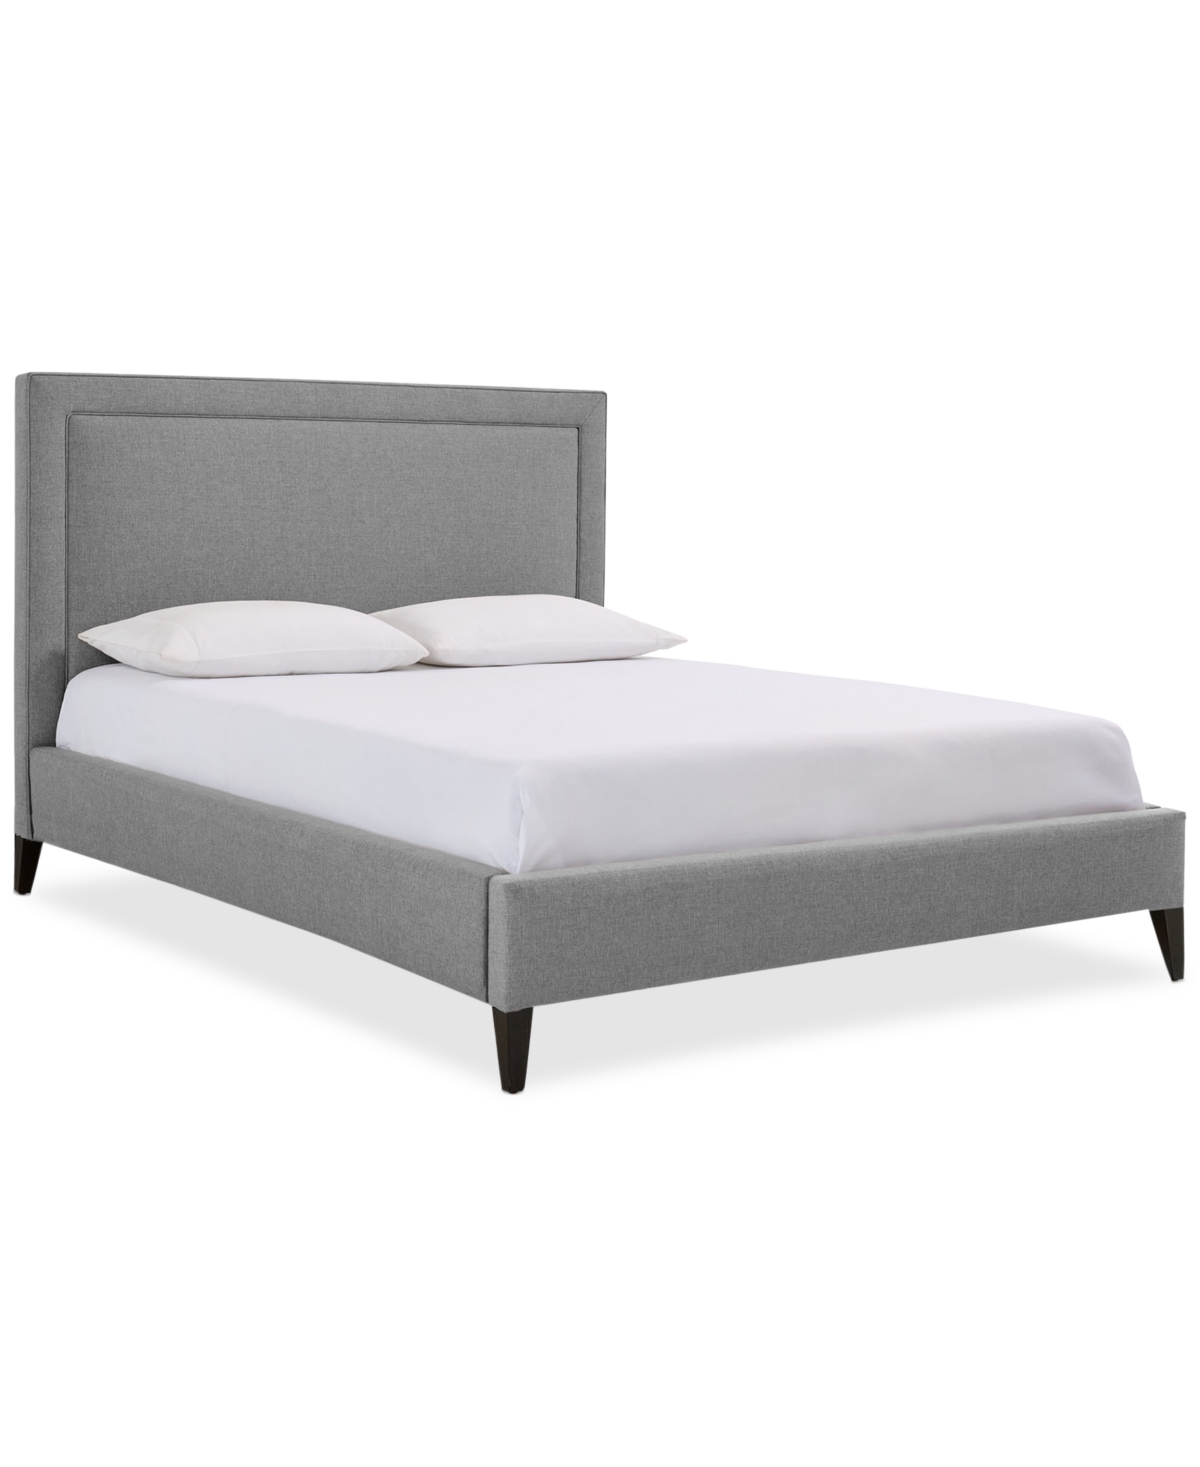 Furniture Naliya Upholstered Queen Bed In Graphite